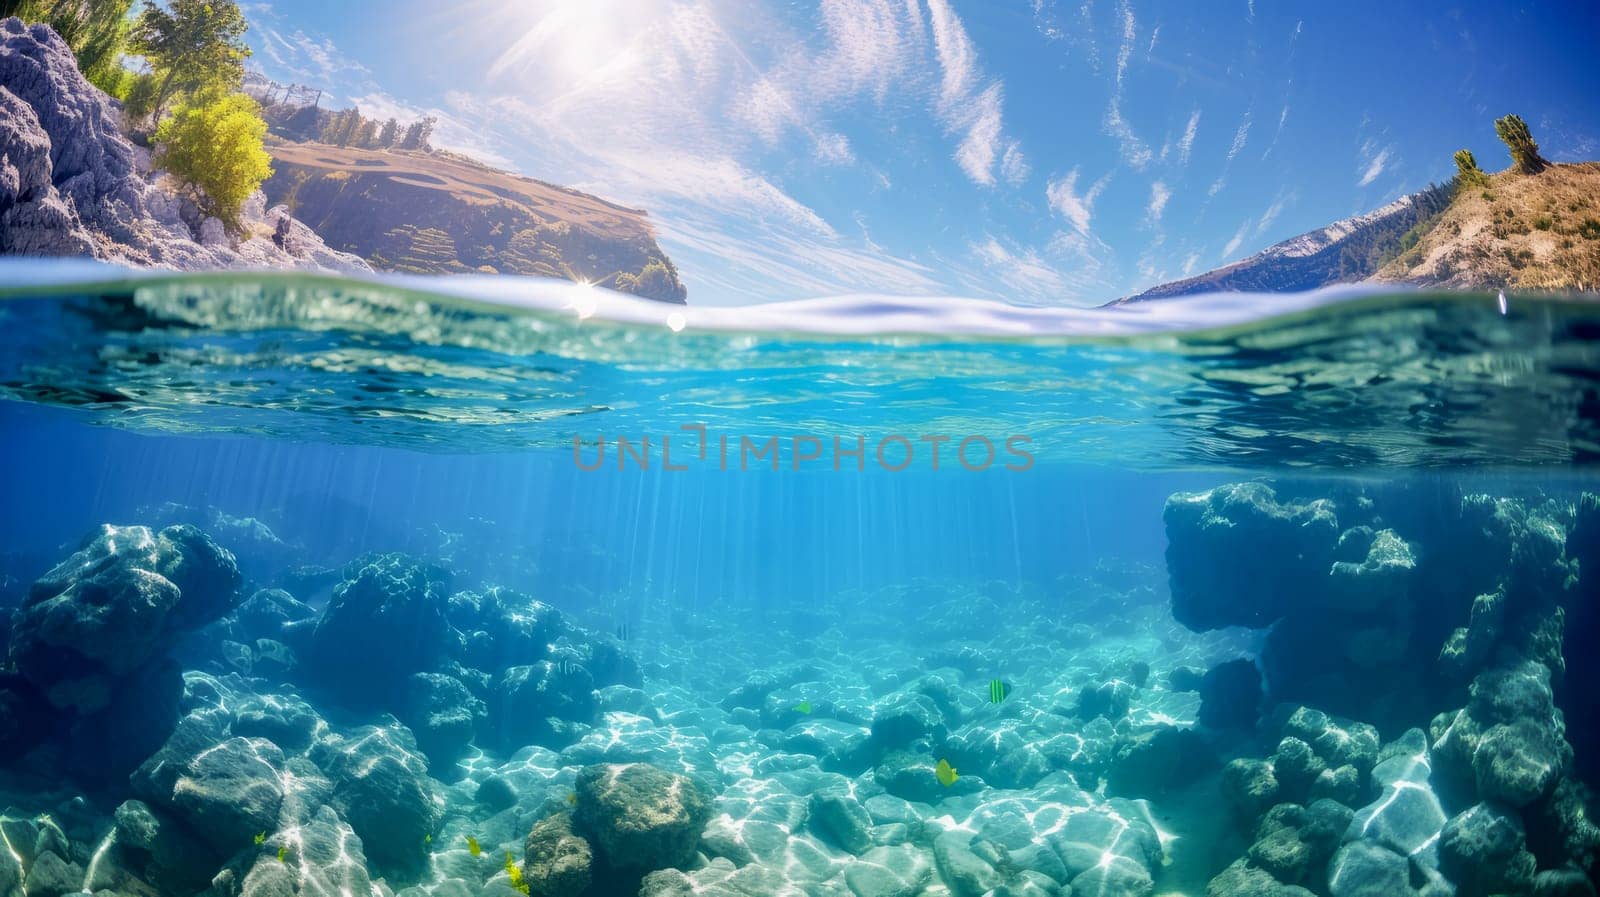 Beautiful blue underwater landscape, sky and mountains. Beautiful landscape, picture, phone screensaver, copy space, advertising, travel agency, tourism, solitude with nature, without people.